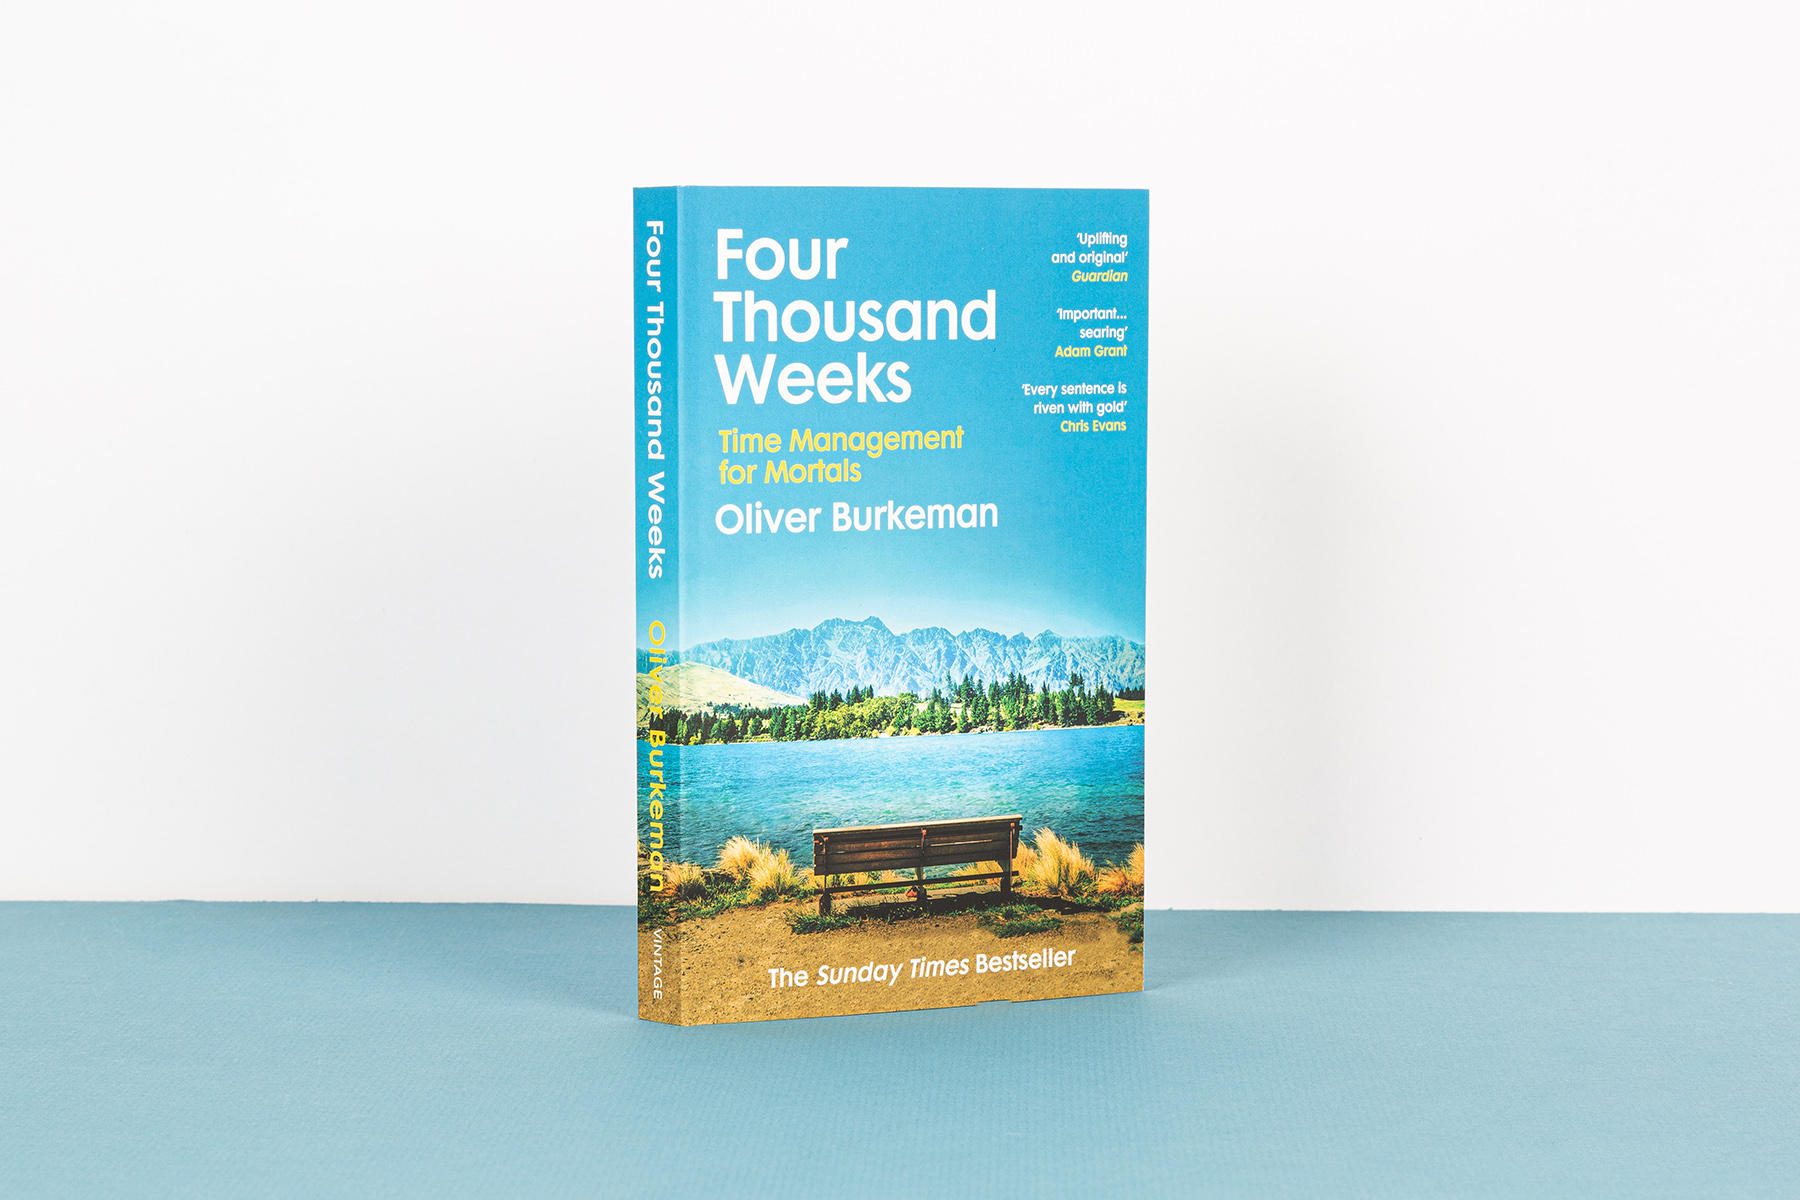 Four Thousand Weeks by Oliver Burkeman, standing upright against a blue and white background.